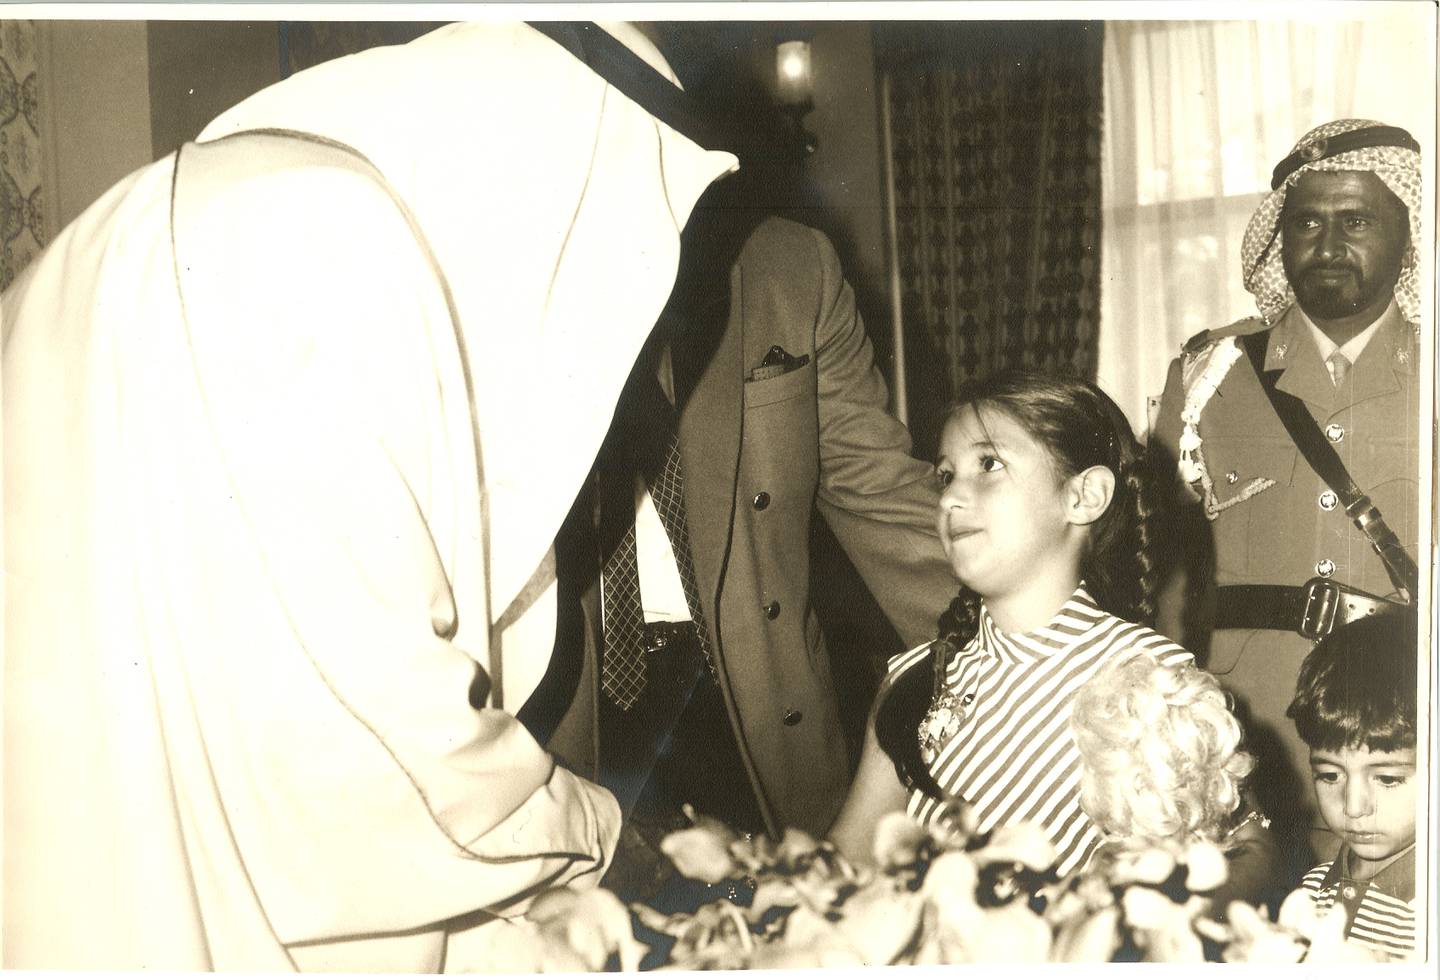 Reem, 5, with Sheikh Zayed, who founded the UAE in 1971. She describes the feelings of joy and privilege at having been immersed in the UAE's history from such an early age. Photo: Dr Reem El Mutwalli